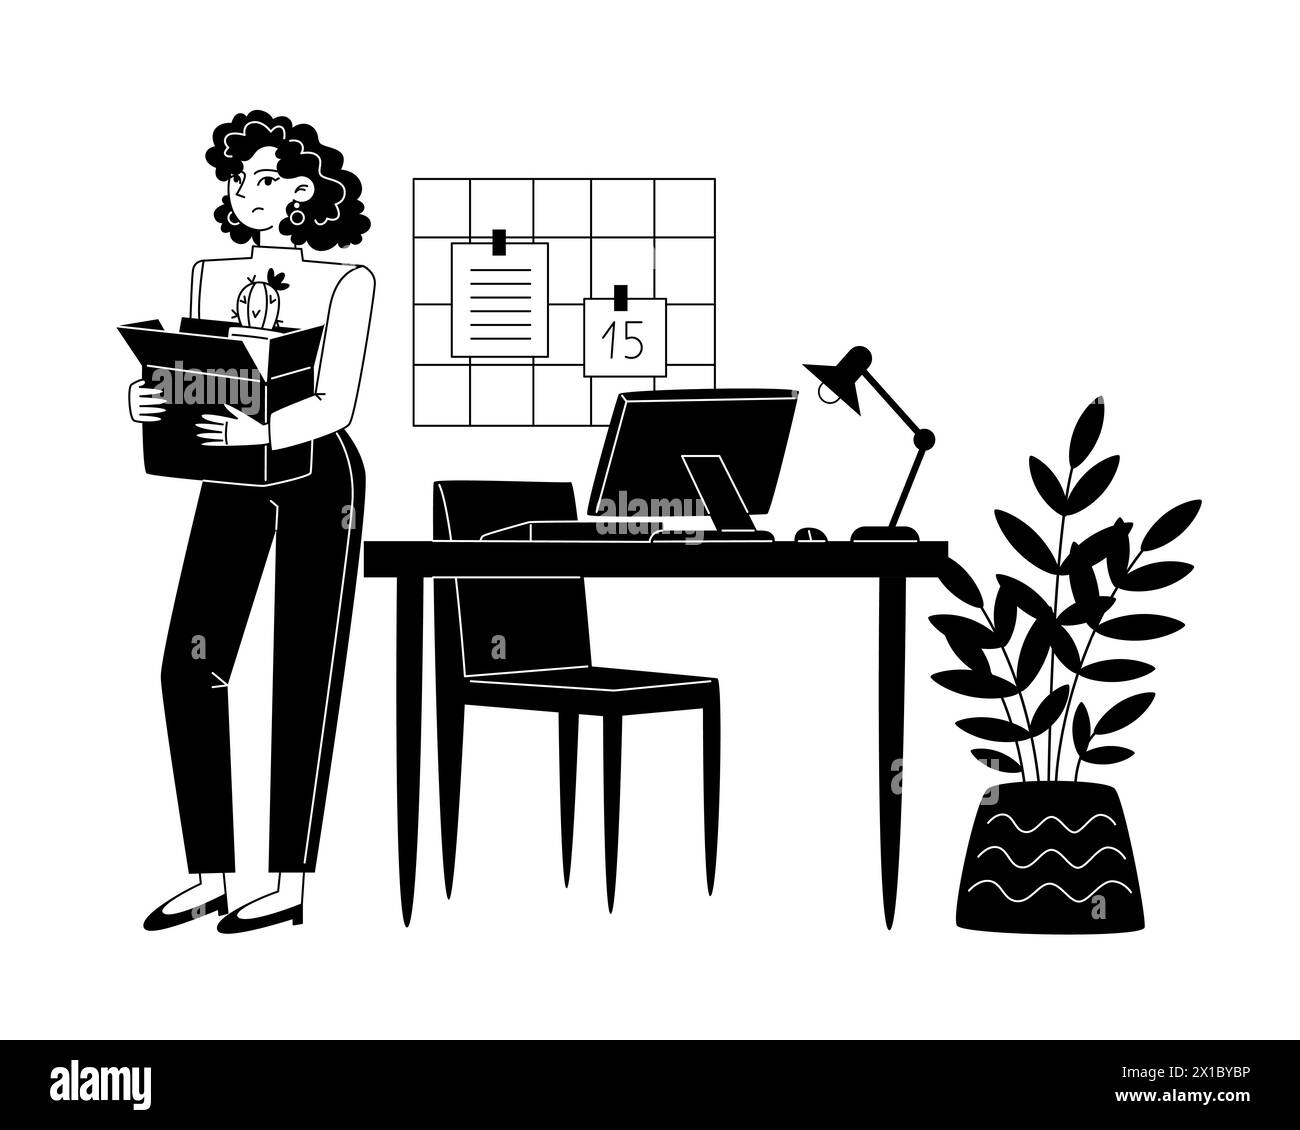 The employee is dismissed from work, black and white illustration Stock Vector